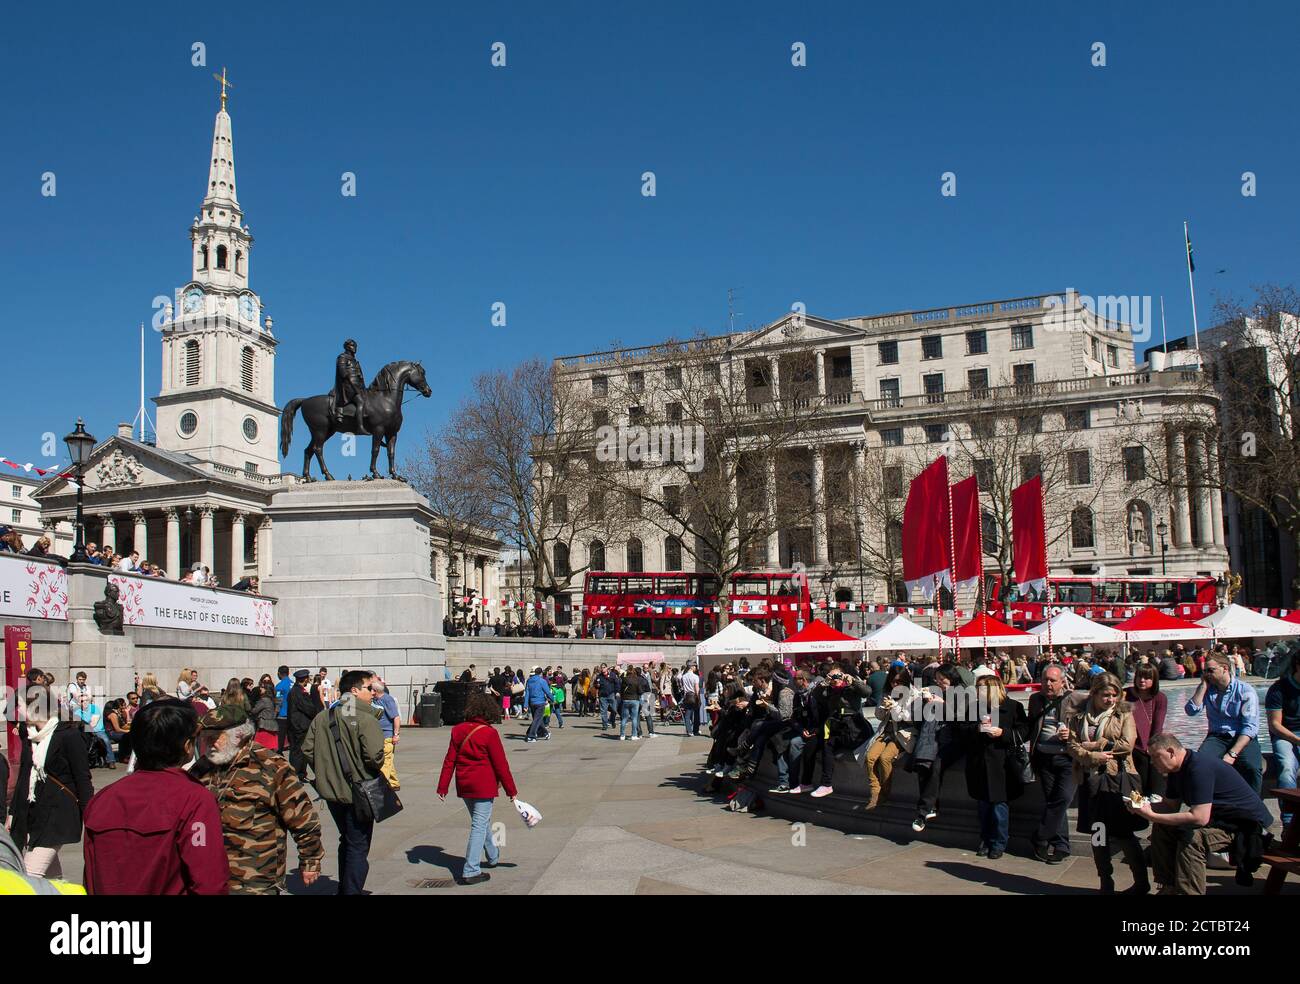 People attending the annual Feast Of St George celebrations in Trafalgar Square, London, England. Stock Photo